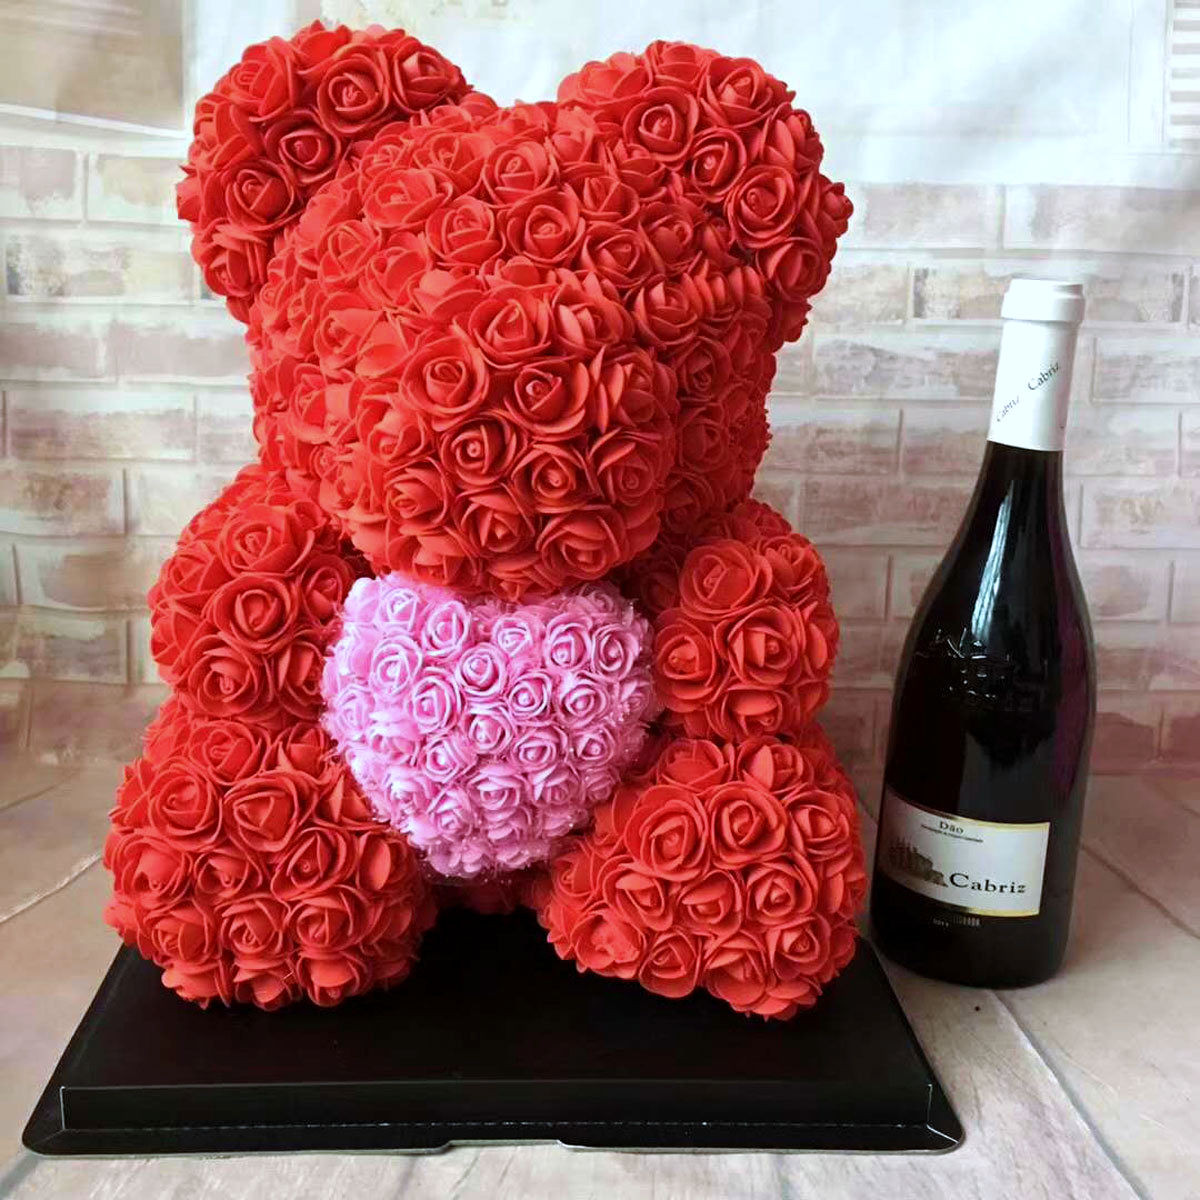 Valentine Gift Ideas For Her Malaysia
 9 Wine Valentines Day Gift Ideas for Her